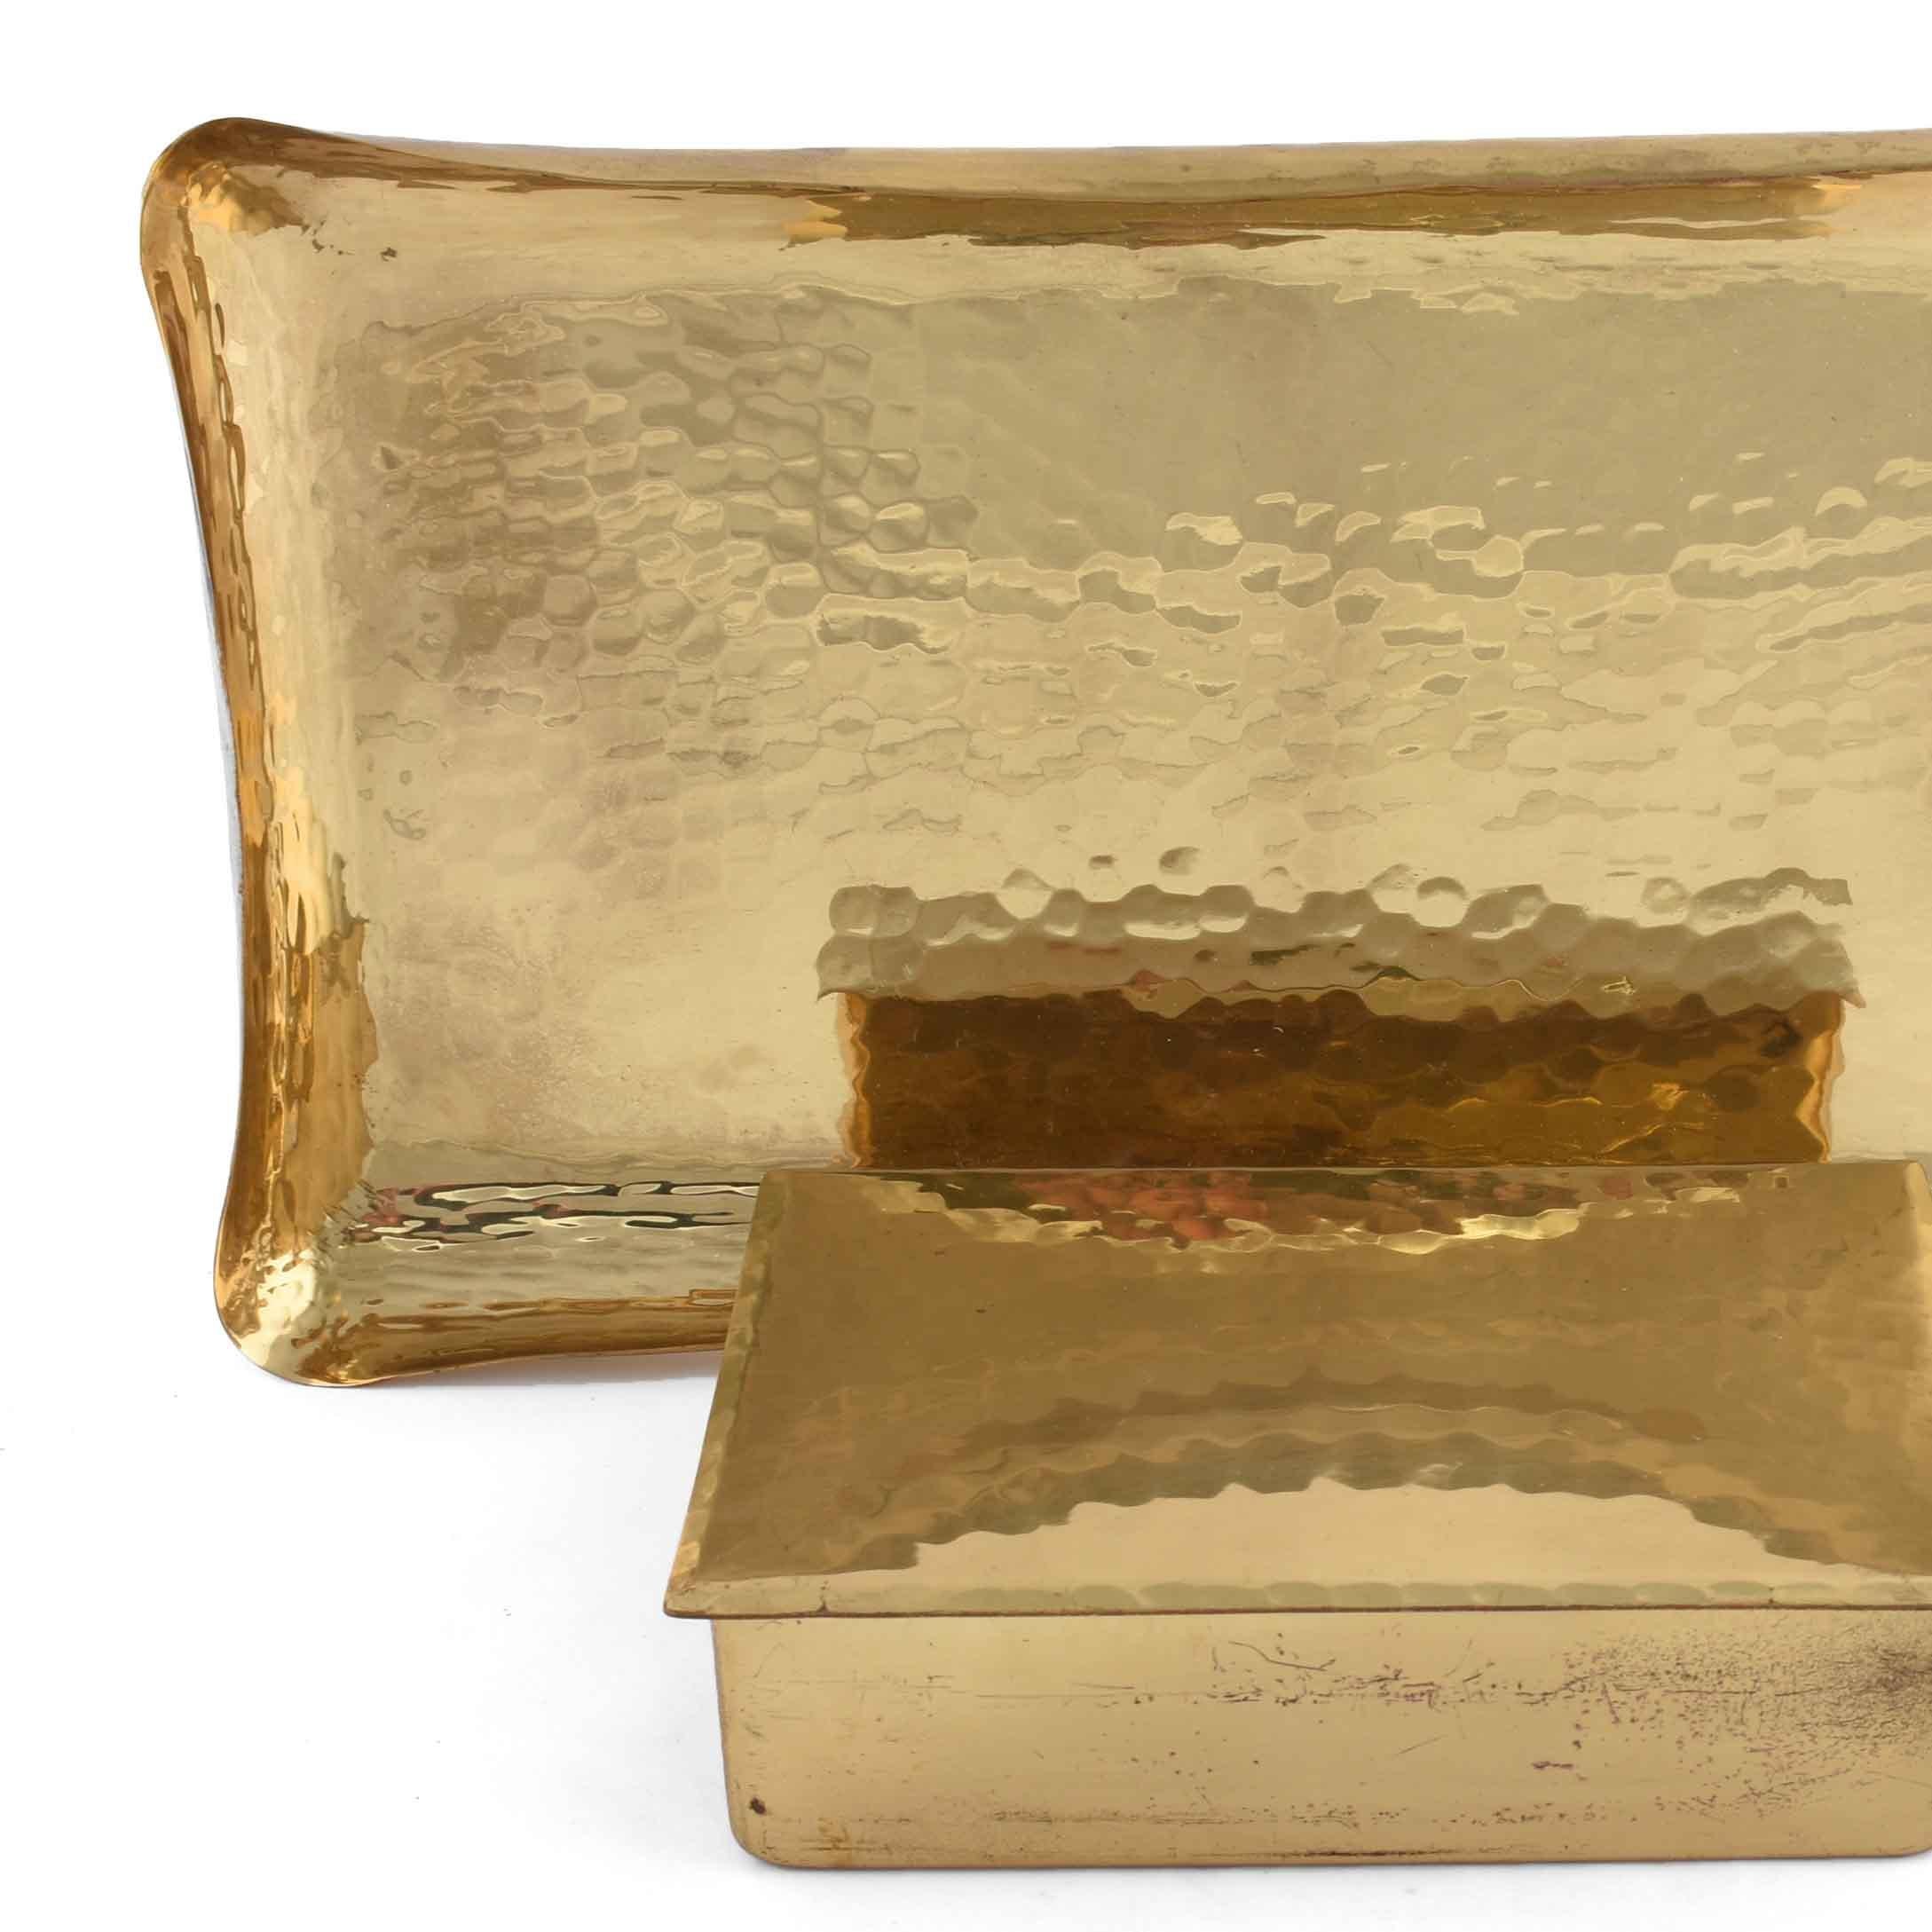 Jewelry box and plate is an original decorative object realized.

Original brass. Realized by Eugen Zint. Made in Germany. 

The mark of Eugen Zint is present on the base. 

The set includes: a brass tray and a Jewelry box (4 x 16.5 x 11.5